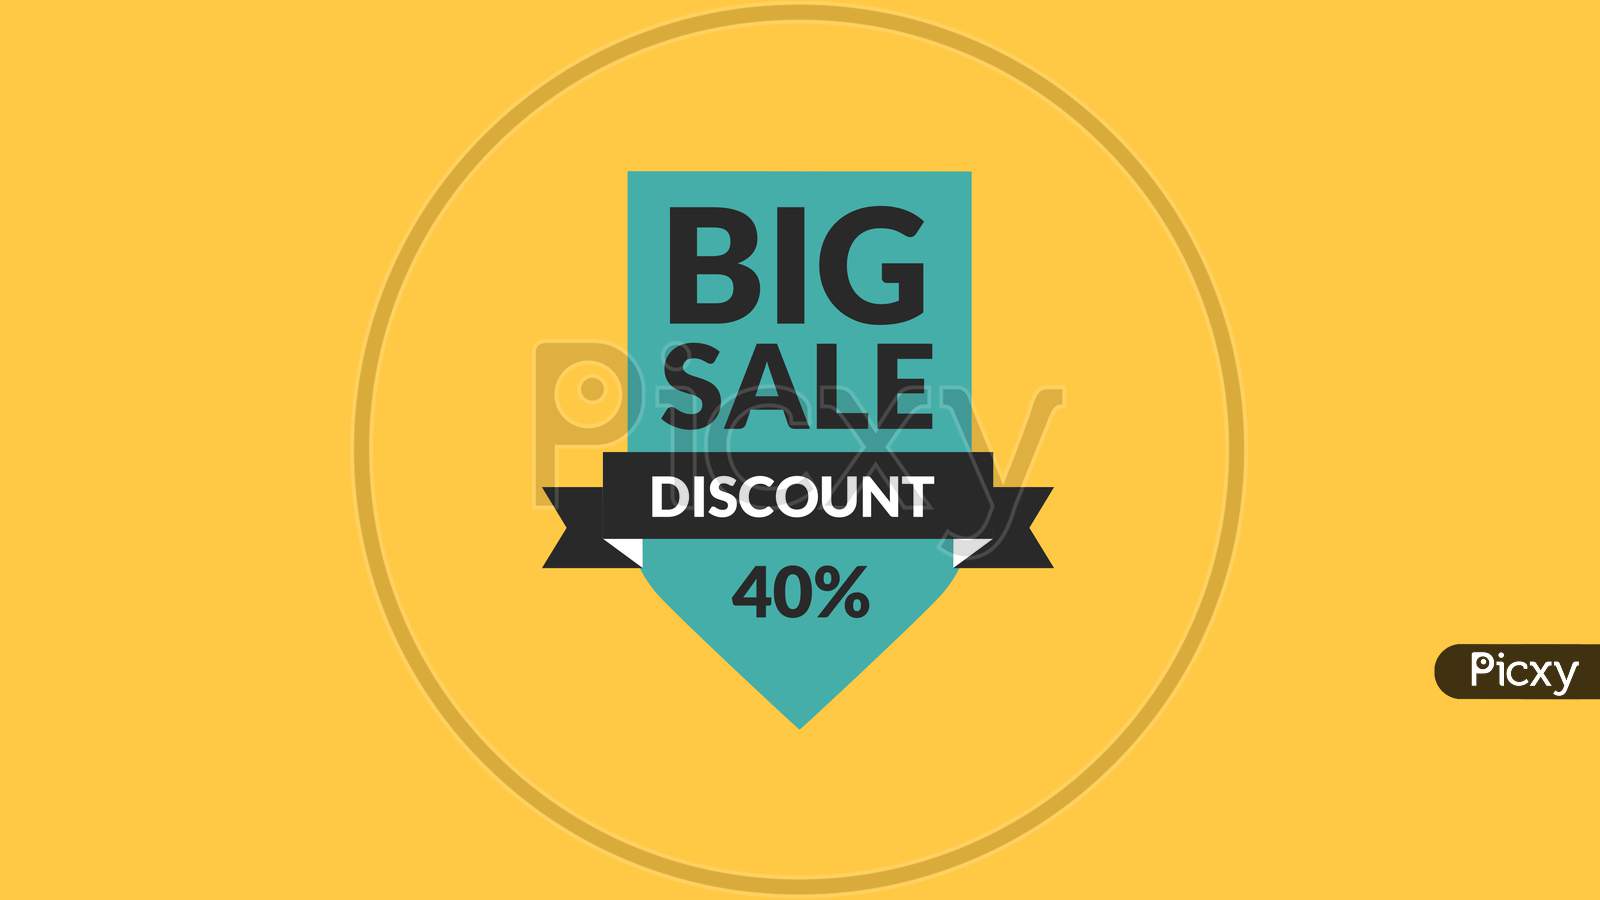 Big Sale Discount 40% Word Illustration Use For Landing Page, Template, Ui, Web, Poster, Banner, Flyer, Background, Gift Card, Coupon, Label, Wallpaper,Sale Promotion,Advertising, Marketing